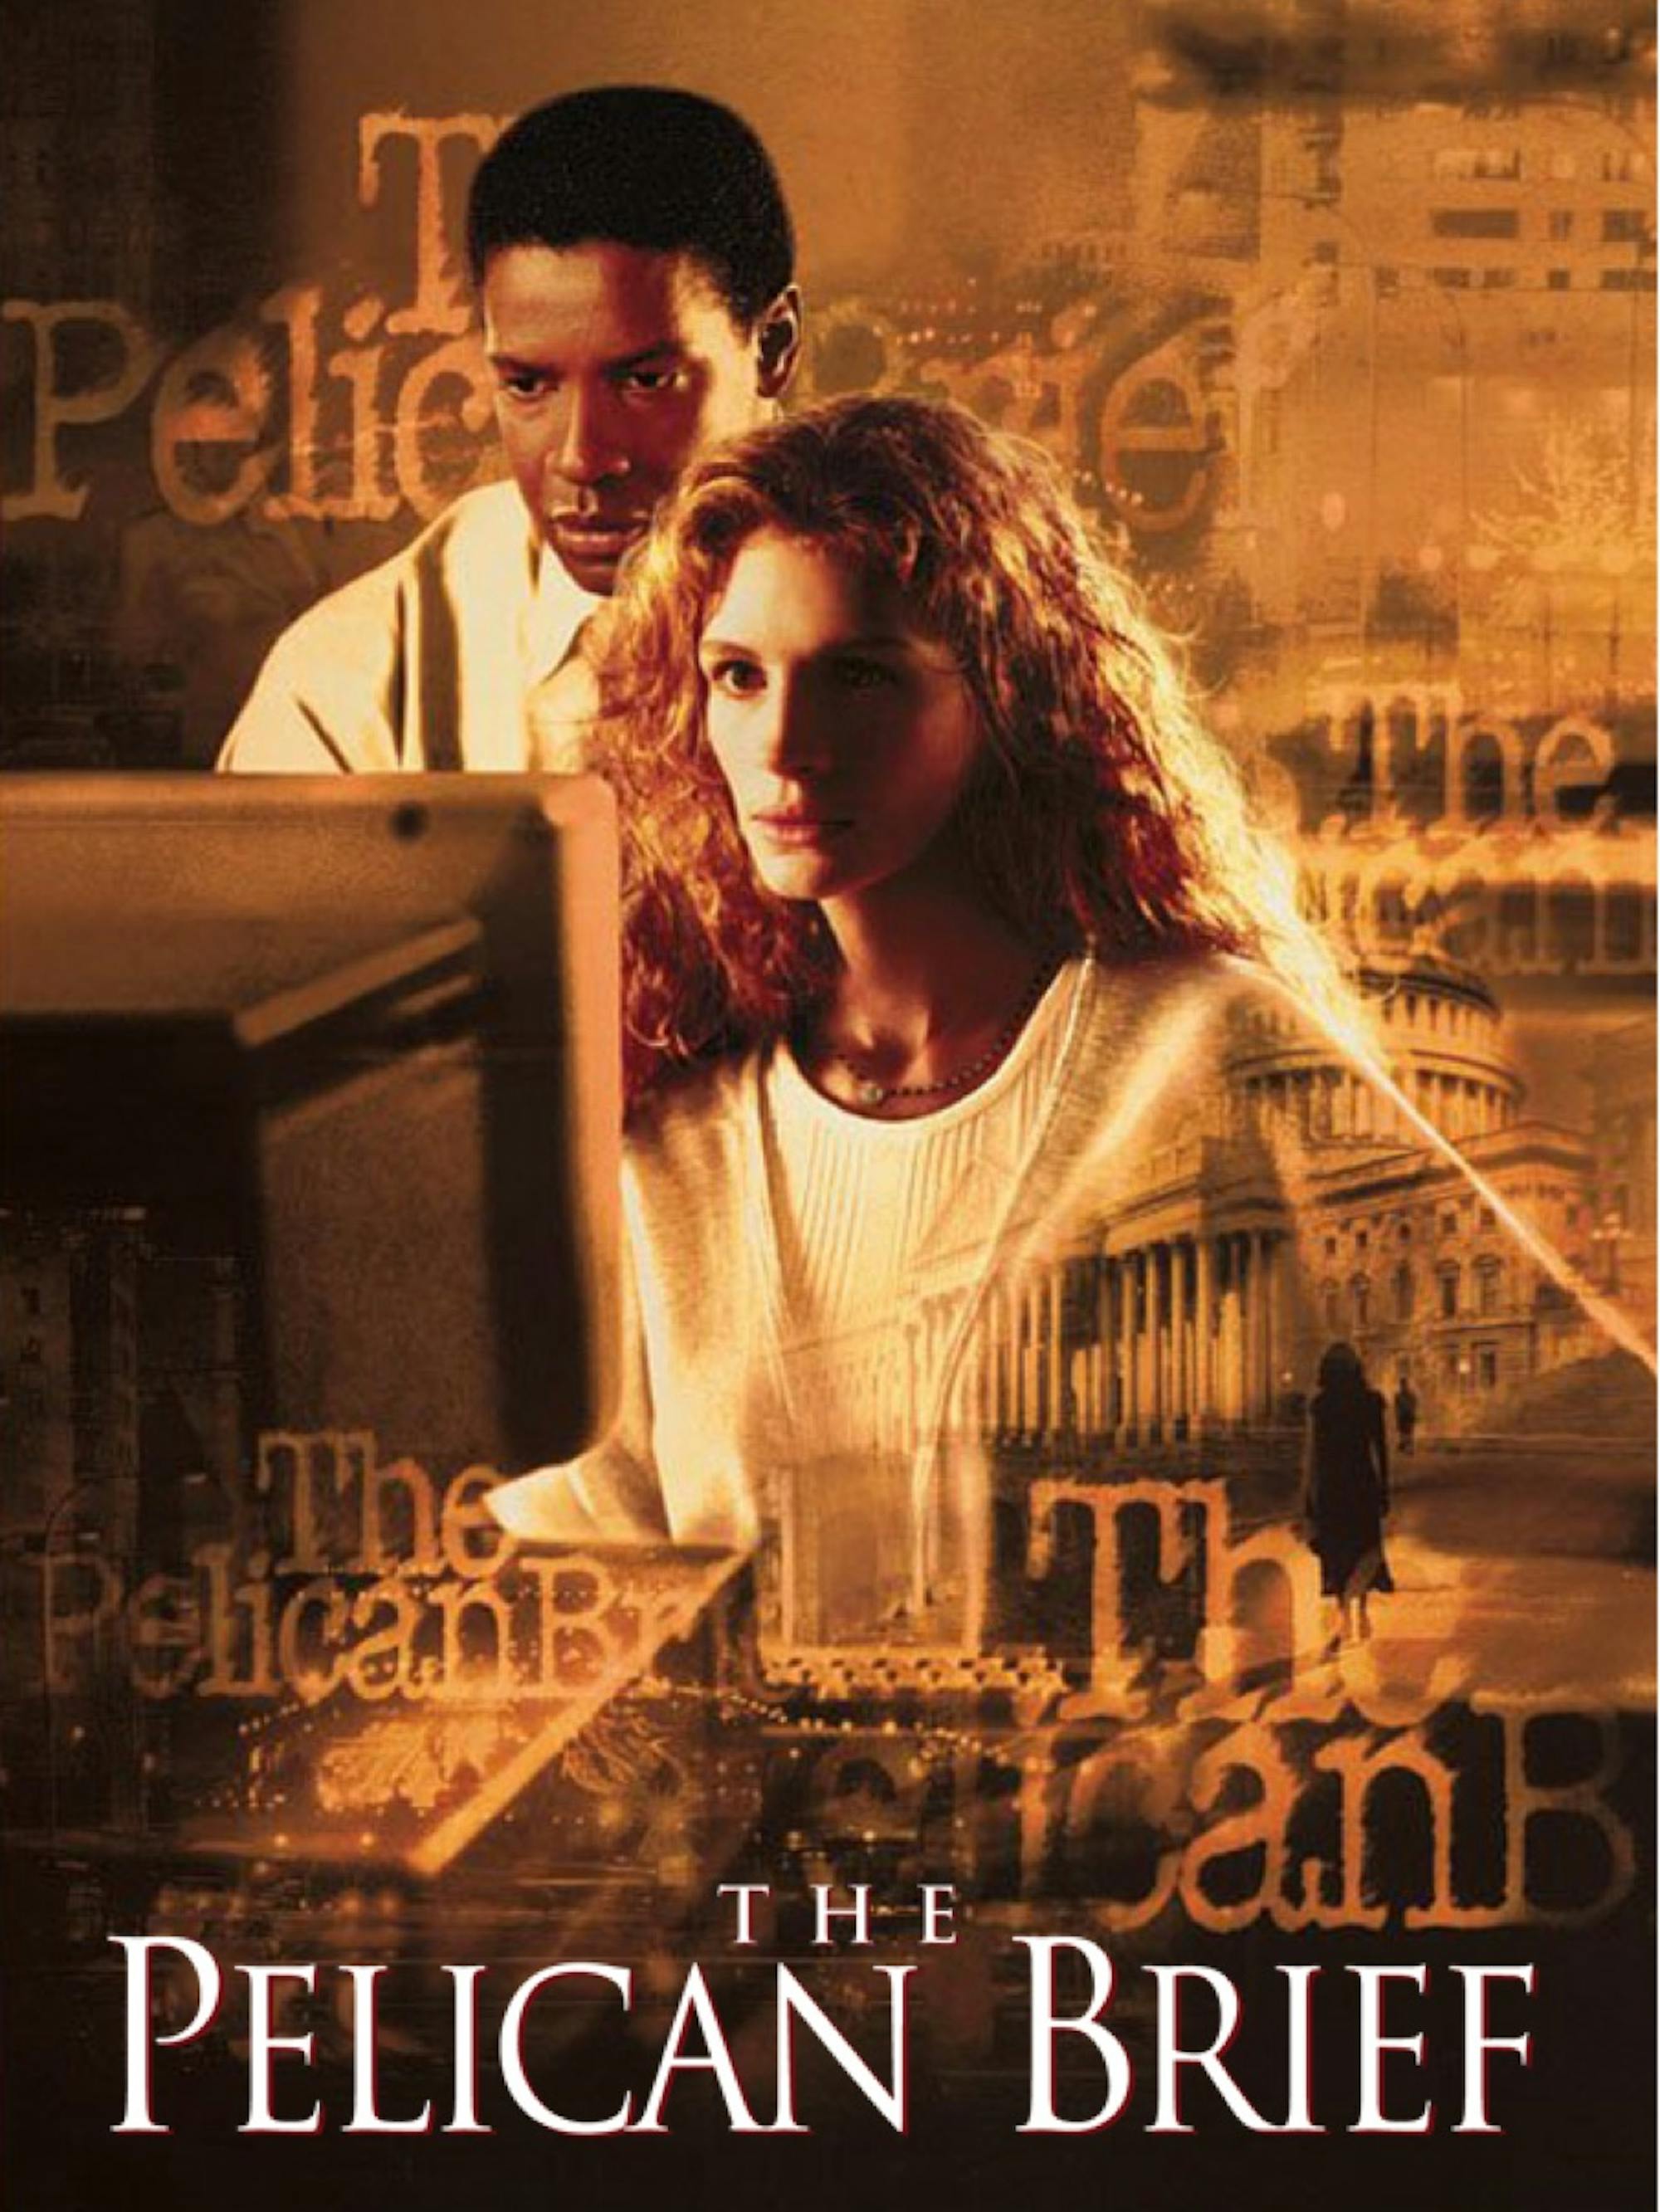 A movie poster of The Pelican Brief with Julia Roberts and Denzel Washington. Both actors look at a computer screen with concerned expressions. The poster has a sepia tone, and the title floats in the background.